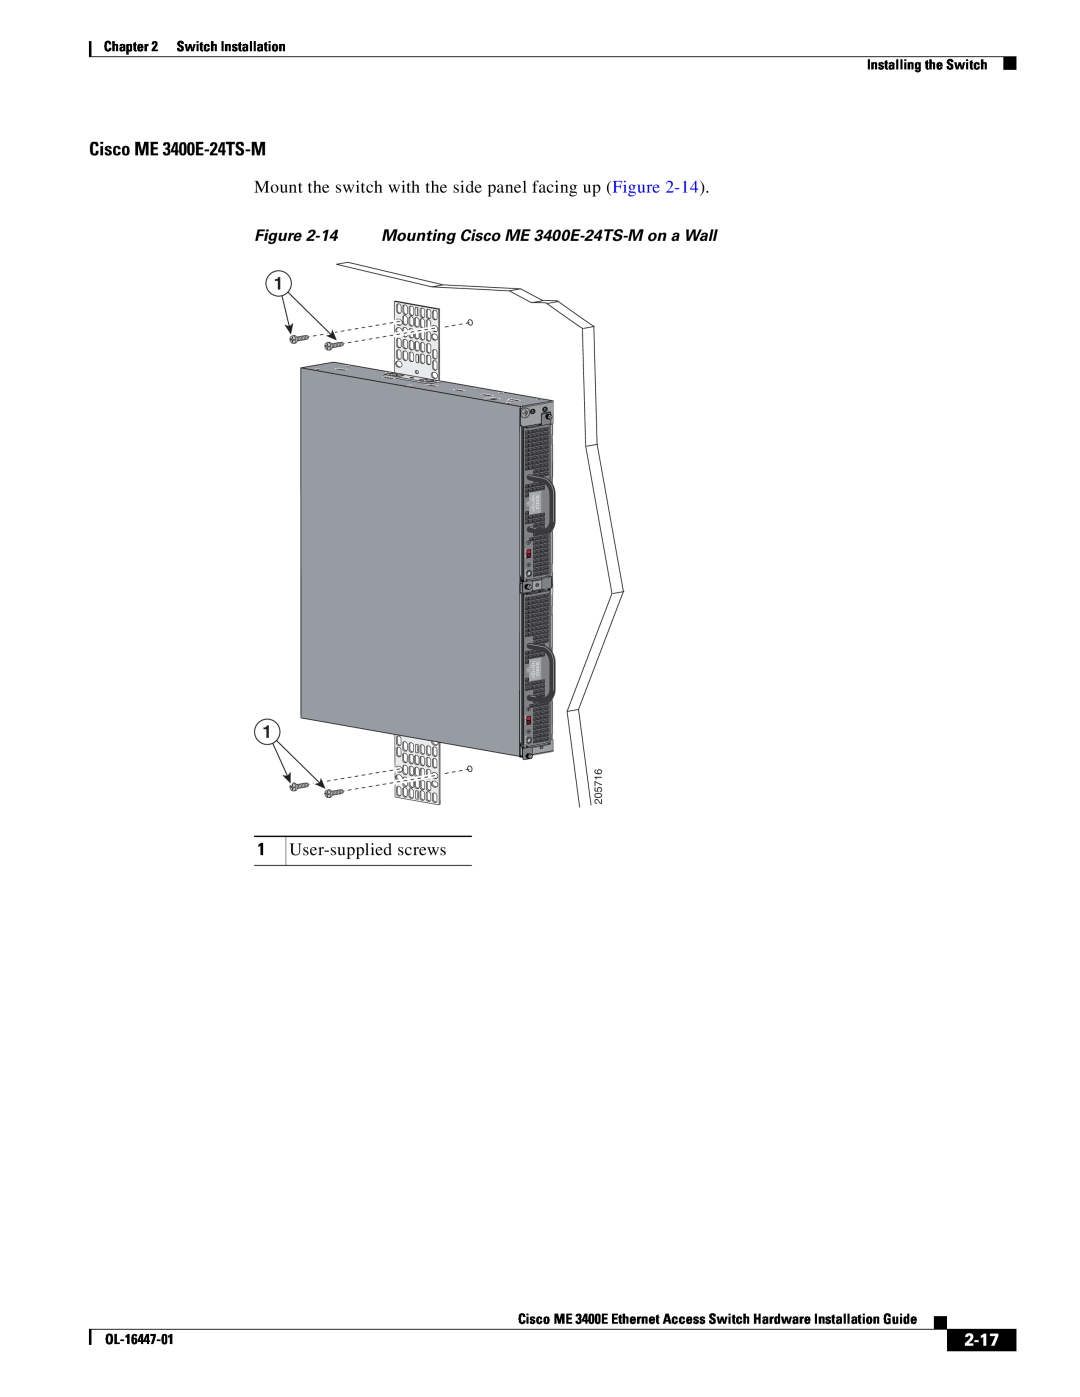 Cisco Systems OL-16447-01 2-17, 14 Mounting Cisco ME 3400E-24TS-M on a Wall, Switch Installation Installing the Switch 